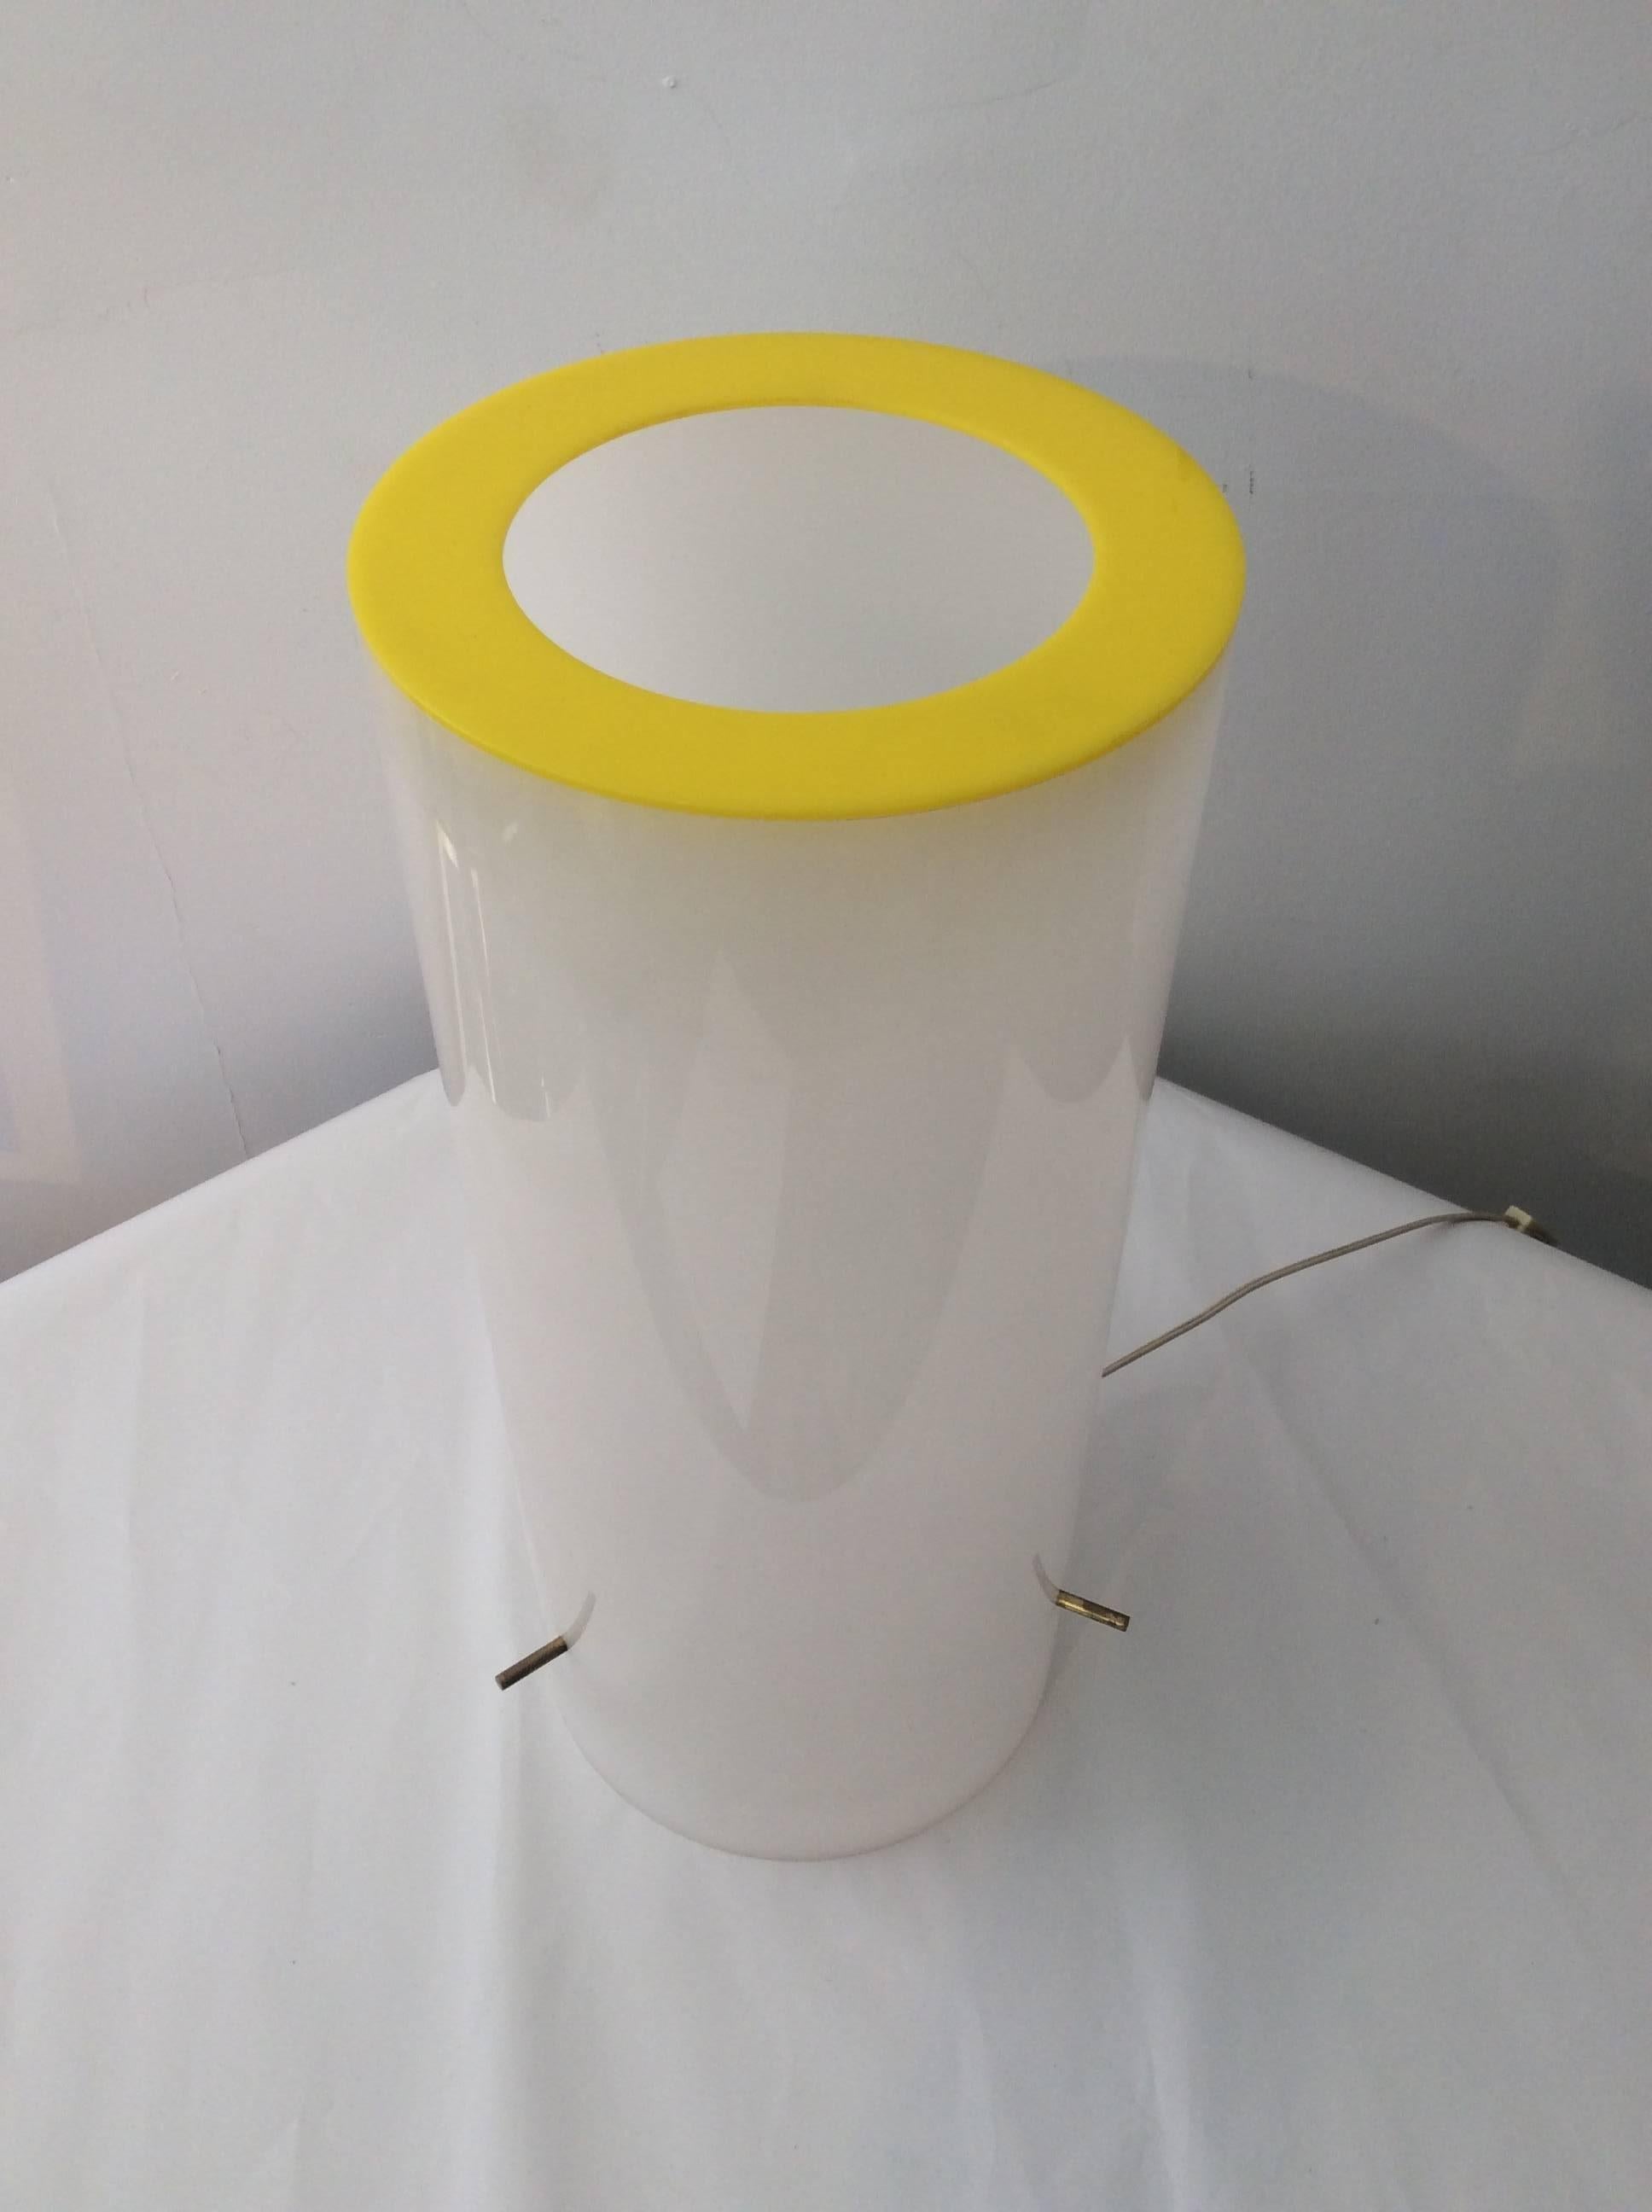 You are looking at a modern table lamp designed by Paul Mayen for Habitat. This lamp is cylindrical in shape and white in color with a yellow ring at top. The bulb mechanism is held by three brass prongs. It uses a regular type bulb. The wiring is